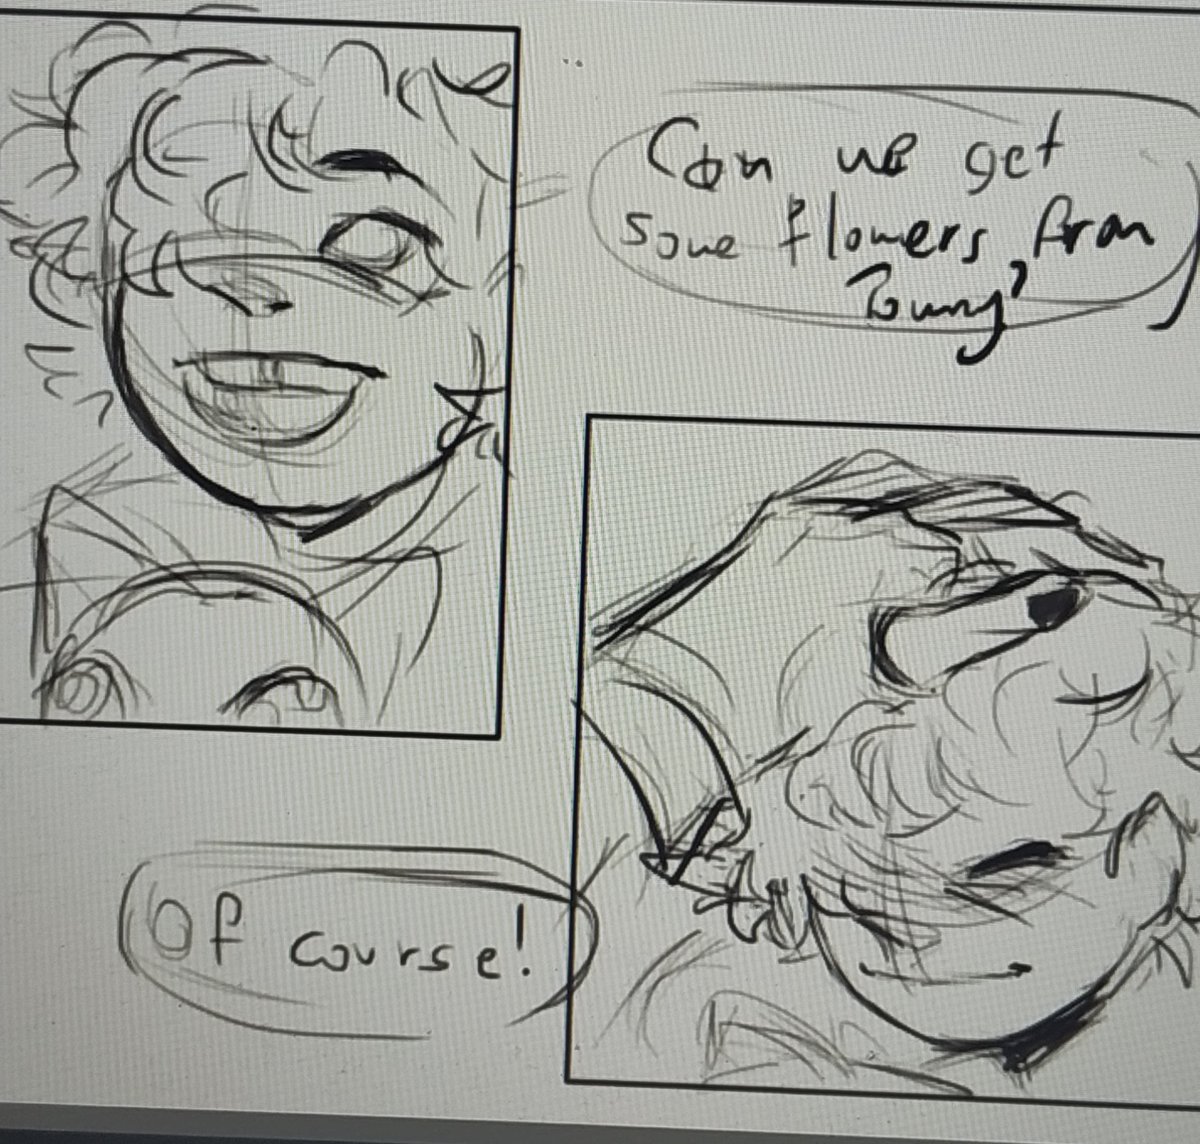 My sunshine
90% of the comic is just Michael and im loving it 